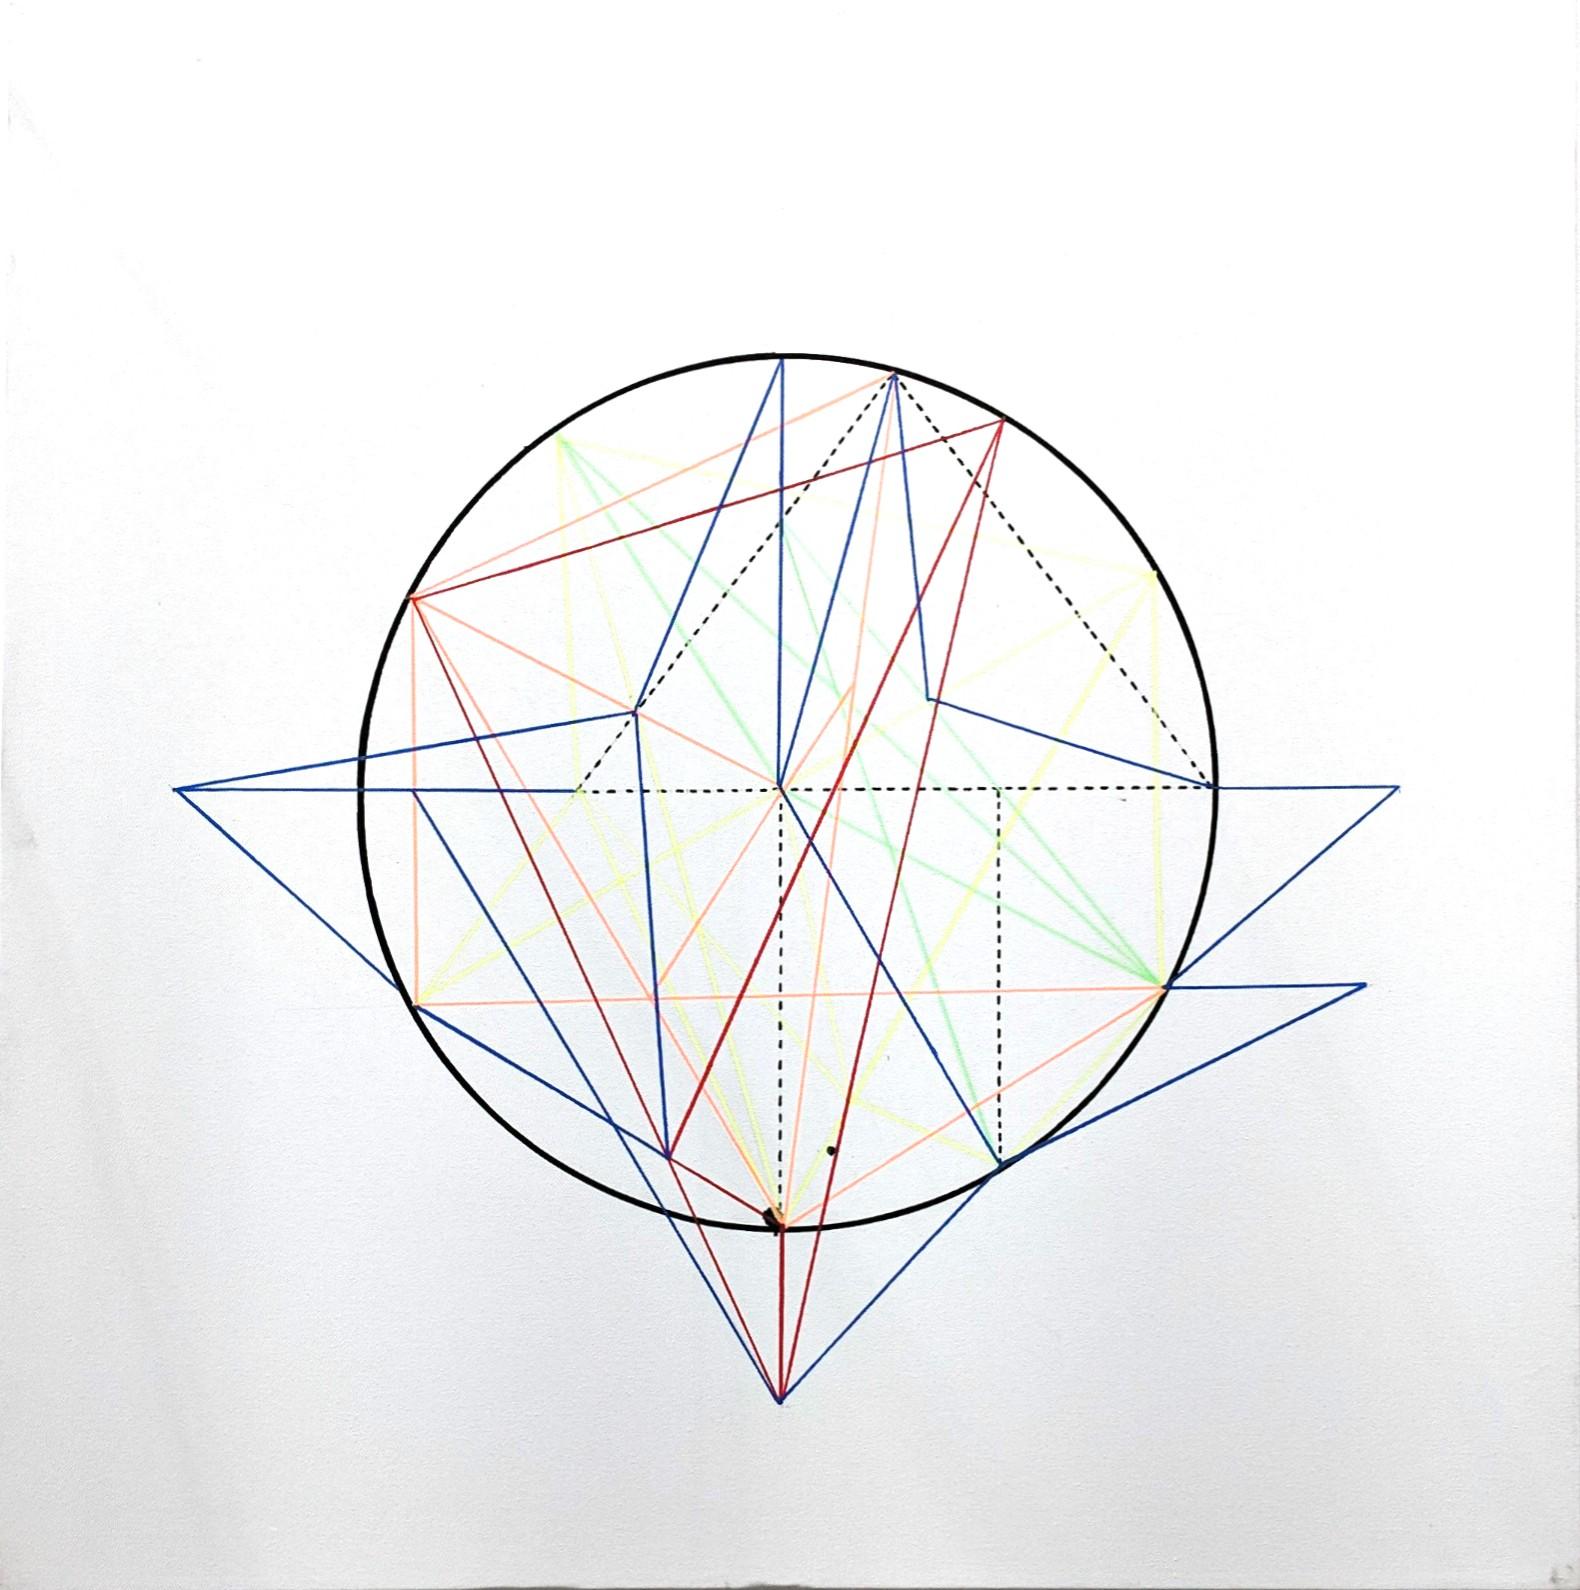 "Ascendant Align II" by Gazoo ToTheMoon is a unique acrylic on canvas painting signed on the back. The minimalist geometric works measures 36" square. It comes with a numbered and signed certificate of authenticity from de Plume.

US shipping is